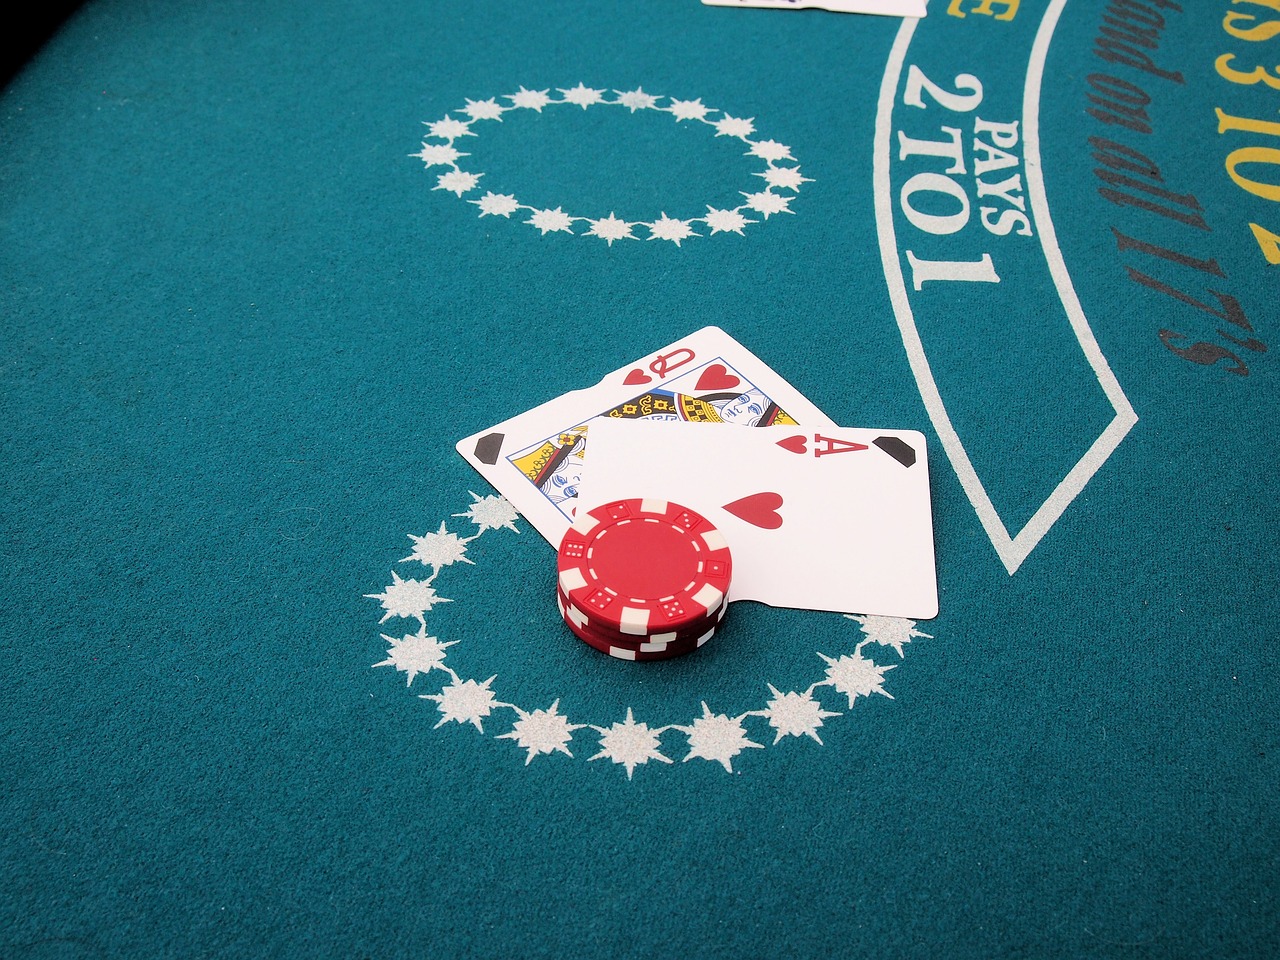 Learn basic blackjack strategy to have a good win